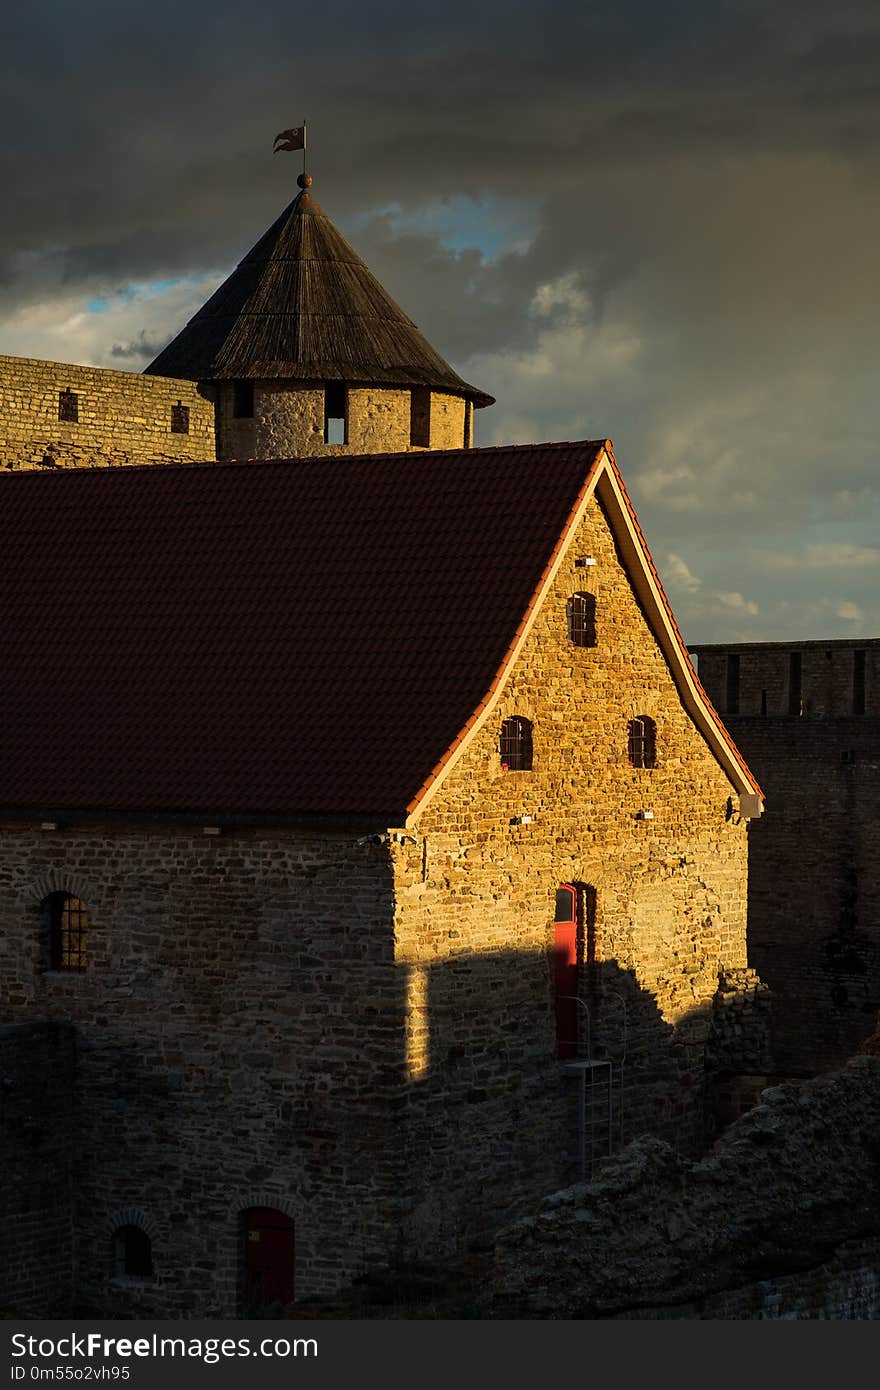 Wonderful view of the fortress in Ivangorod at sunset.